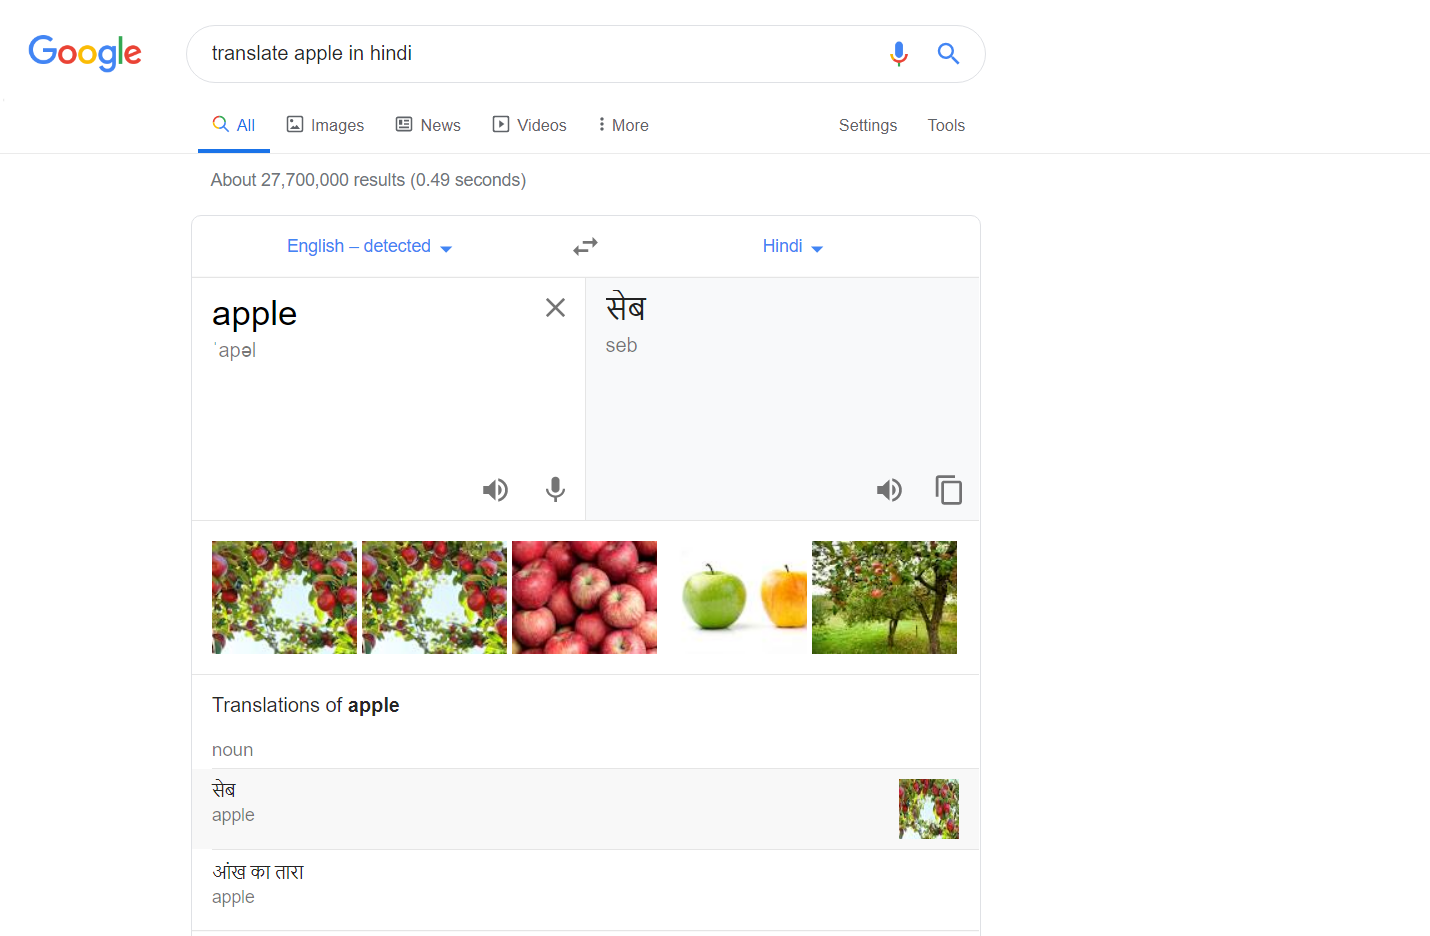 Good news for visual learners: Google now shows images along with translated words in search results for more context